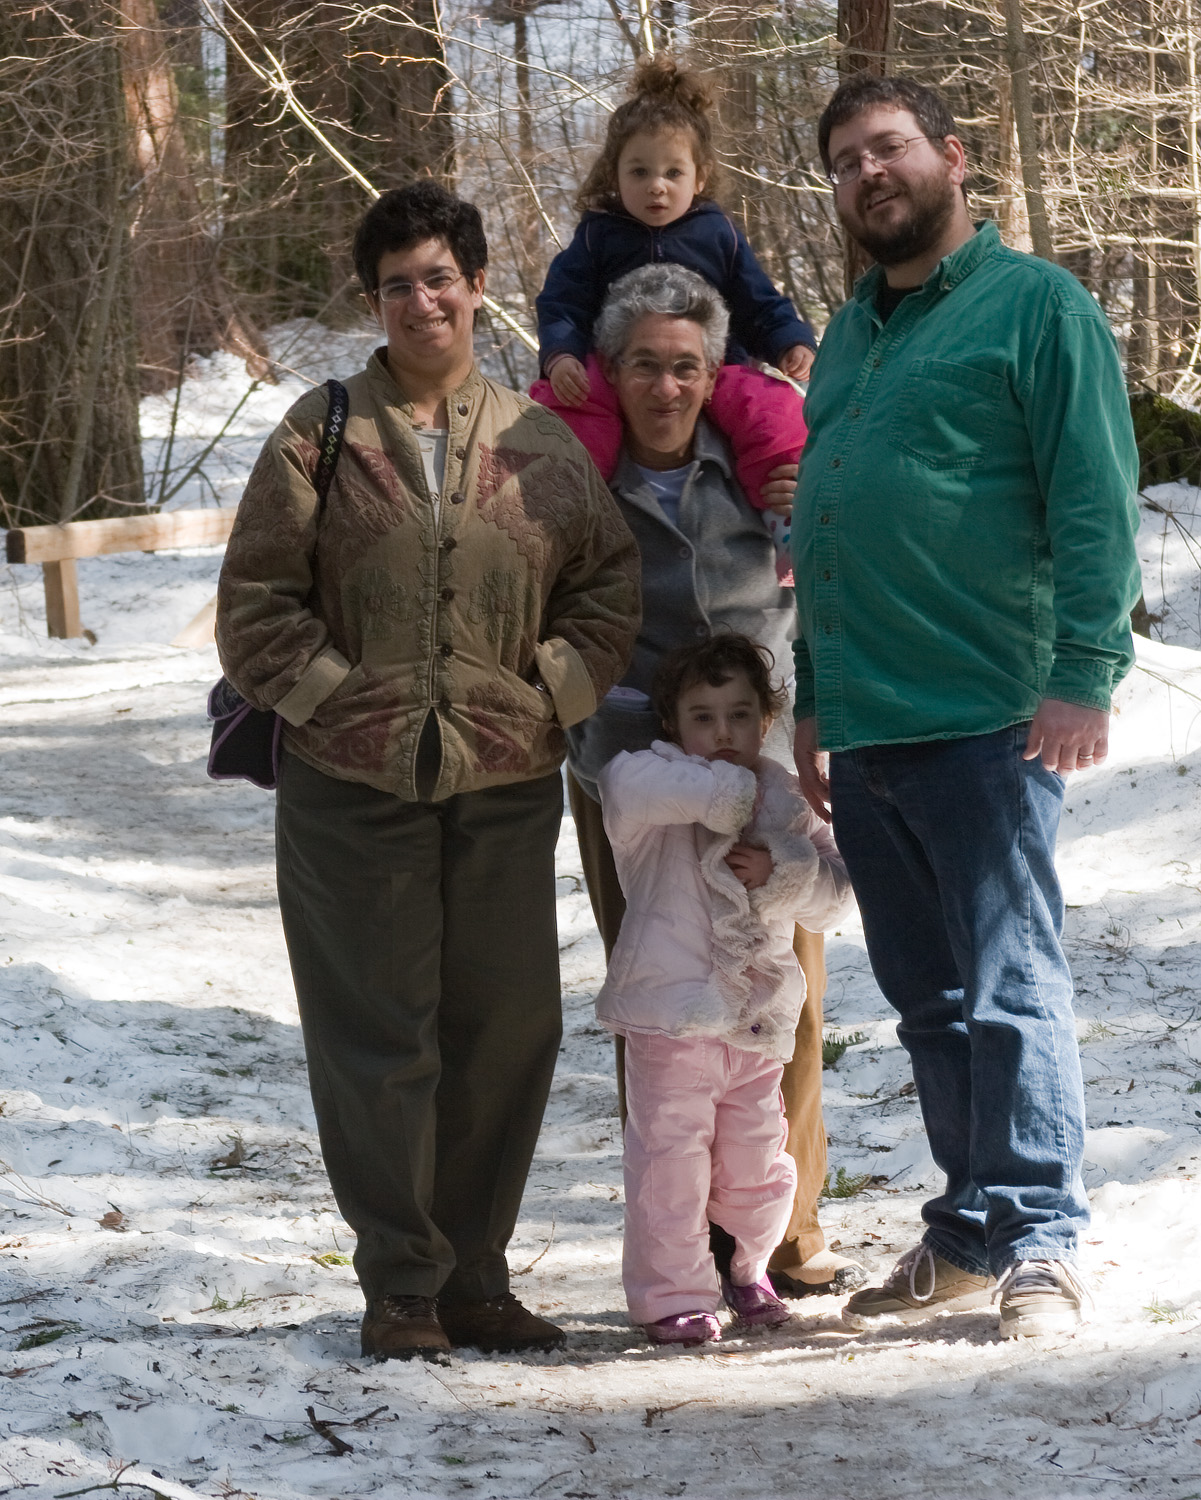 The family at Big Trees Park